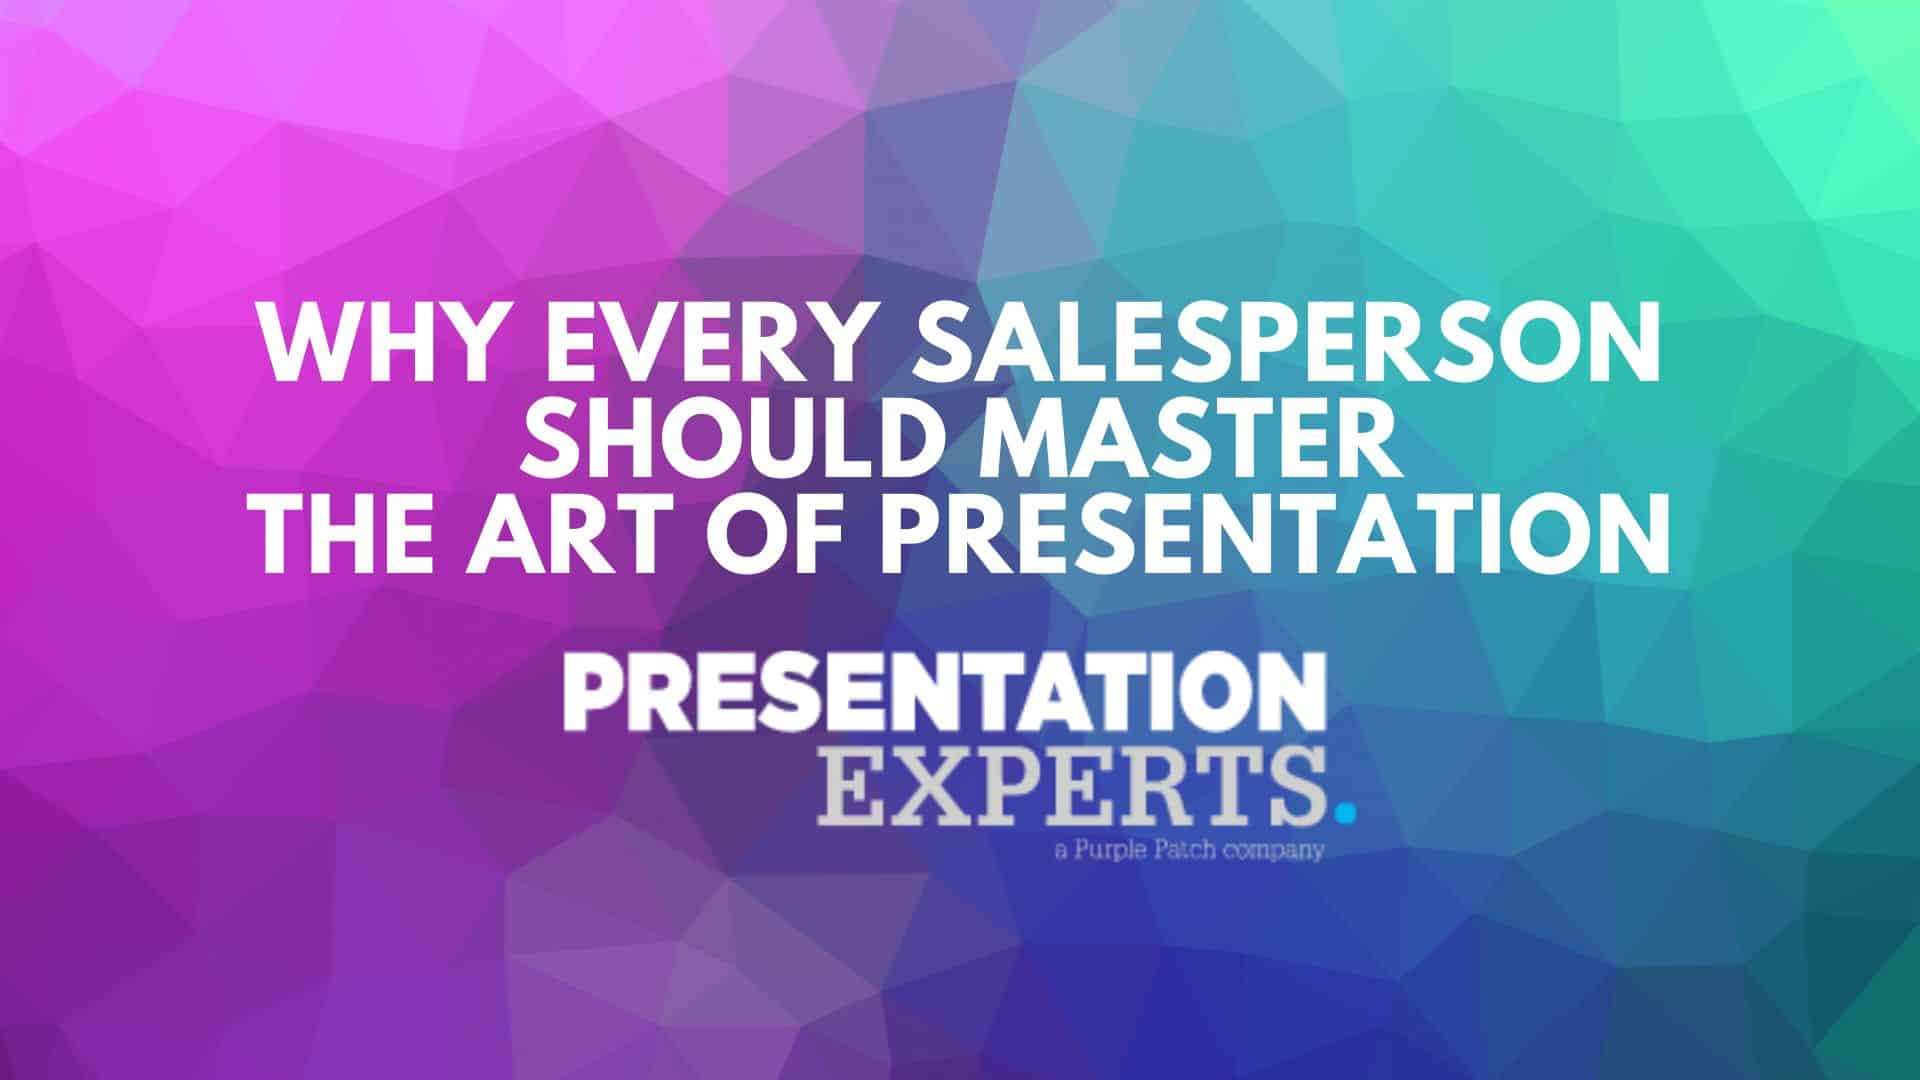 Why Every Salesperson Should Master the Art of Presentation